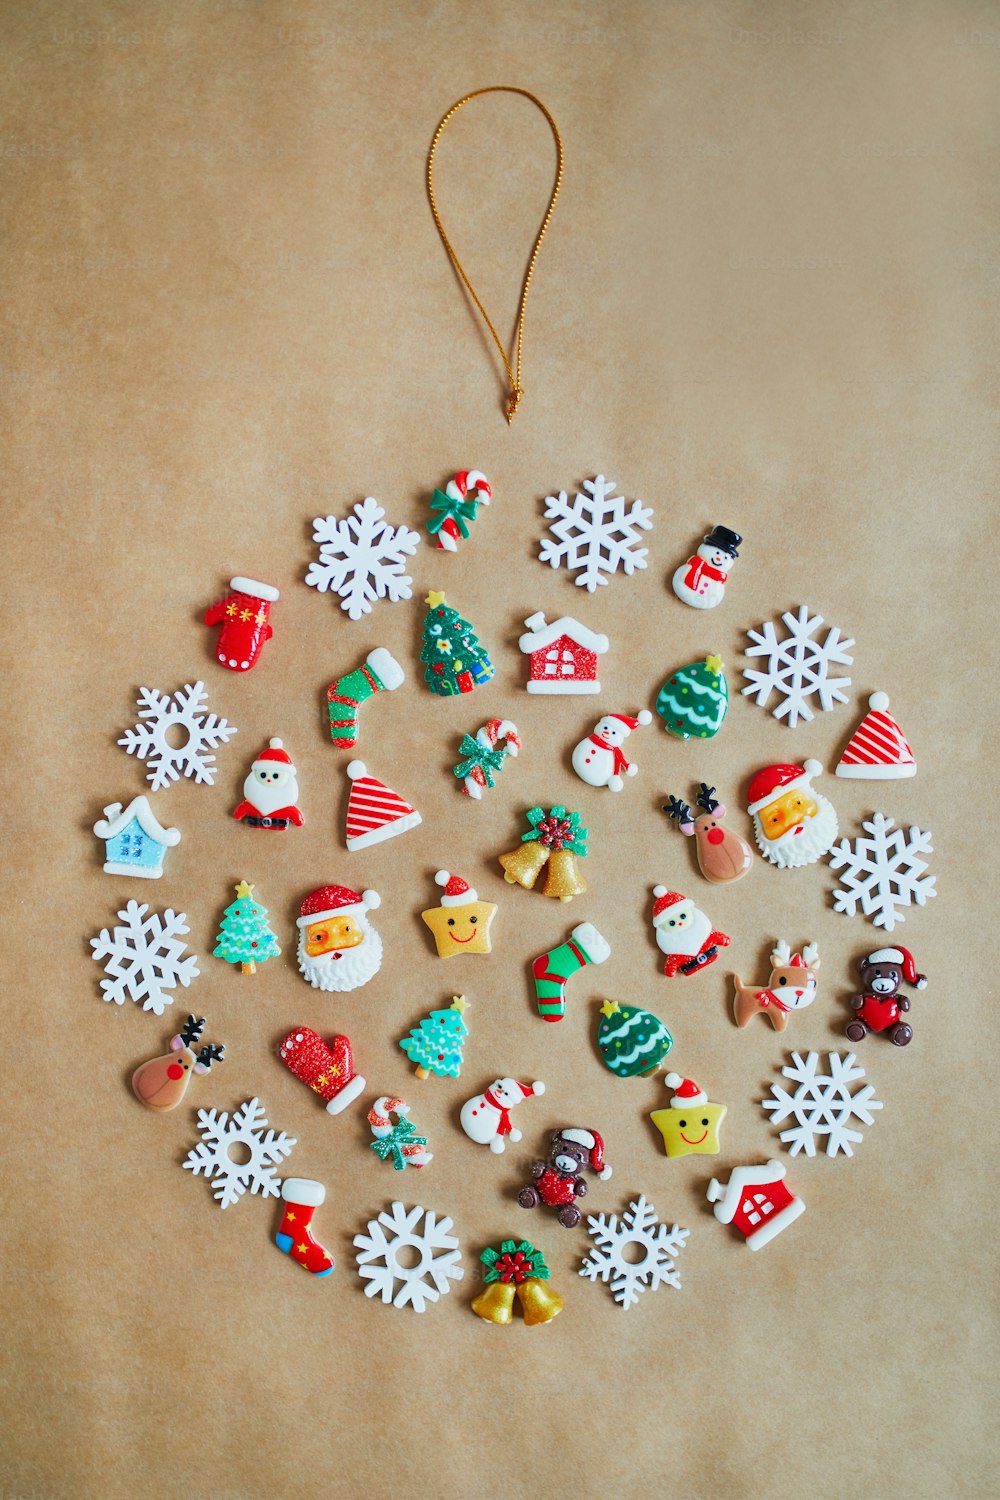 Christmas decorations flat lay. Bauble made from small figurines with New Year theme. Seasonal holidays celebration concept